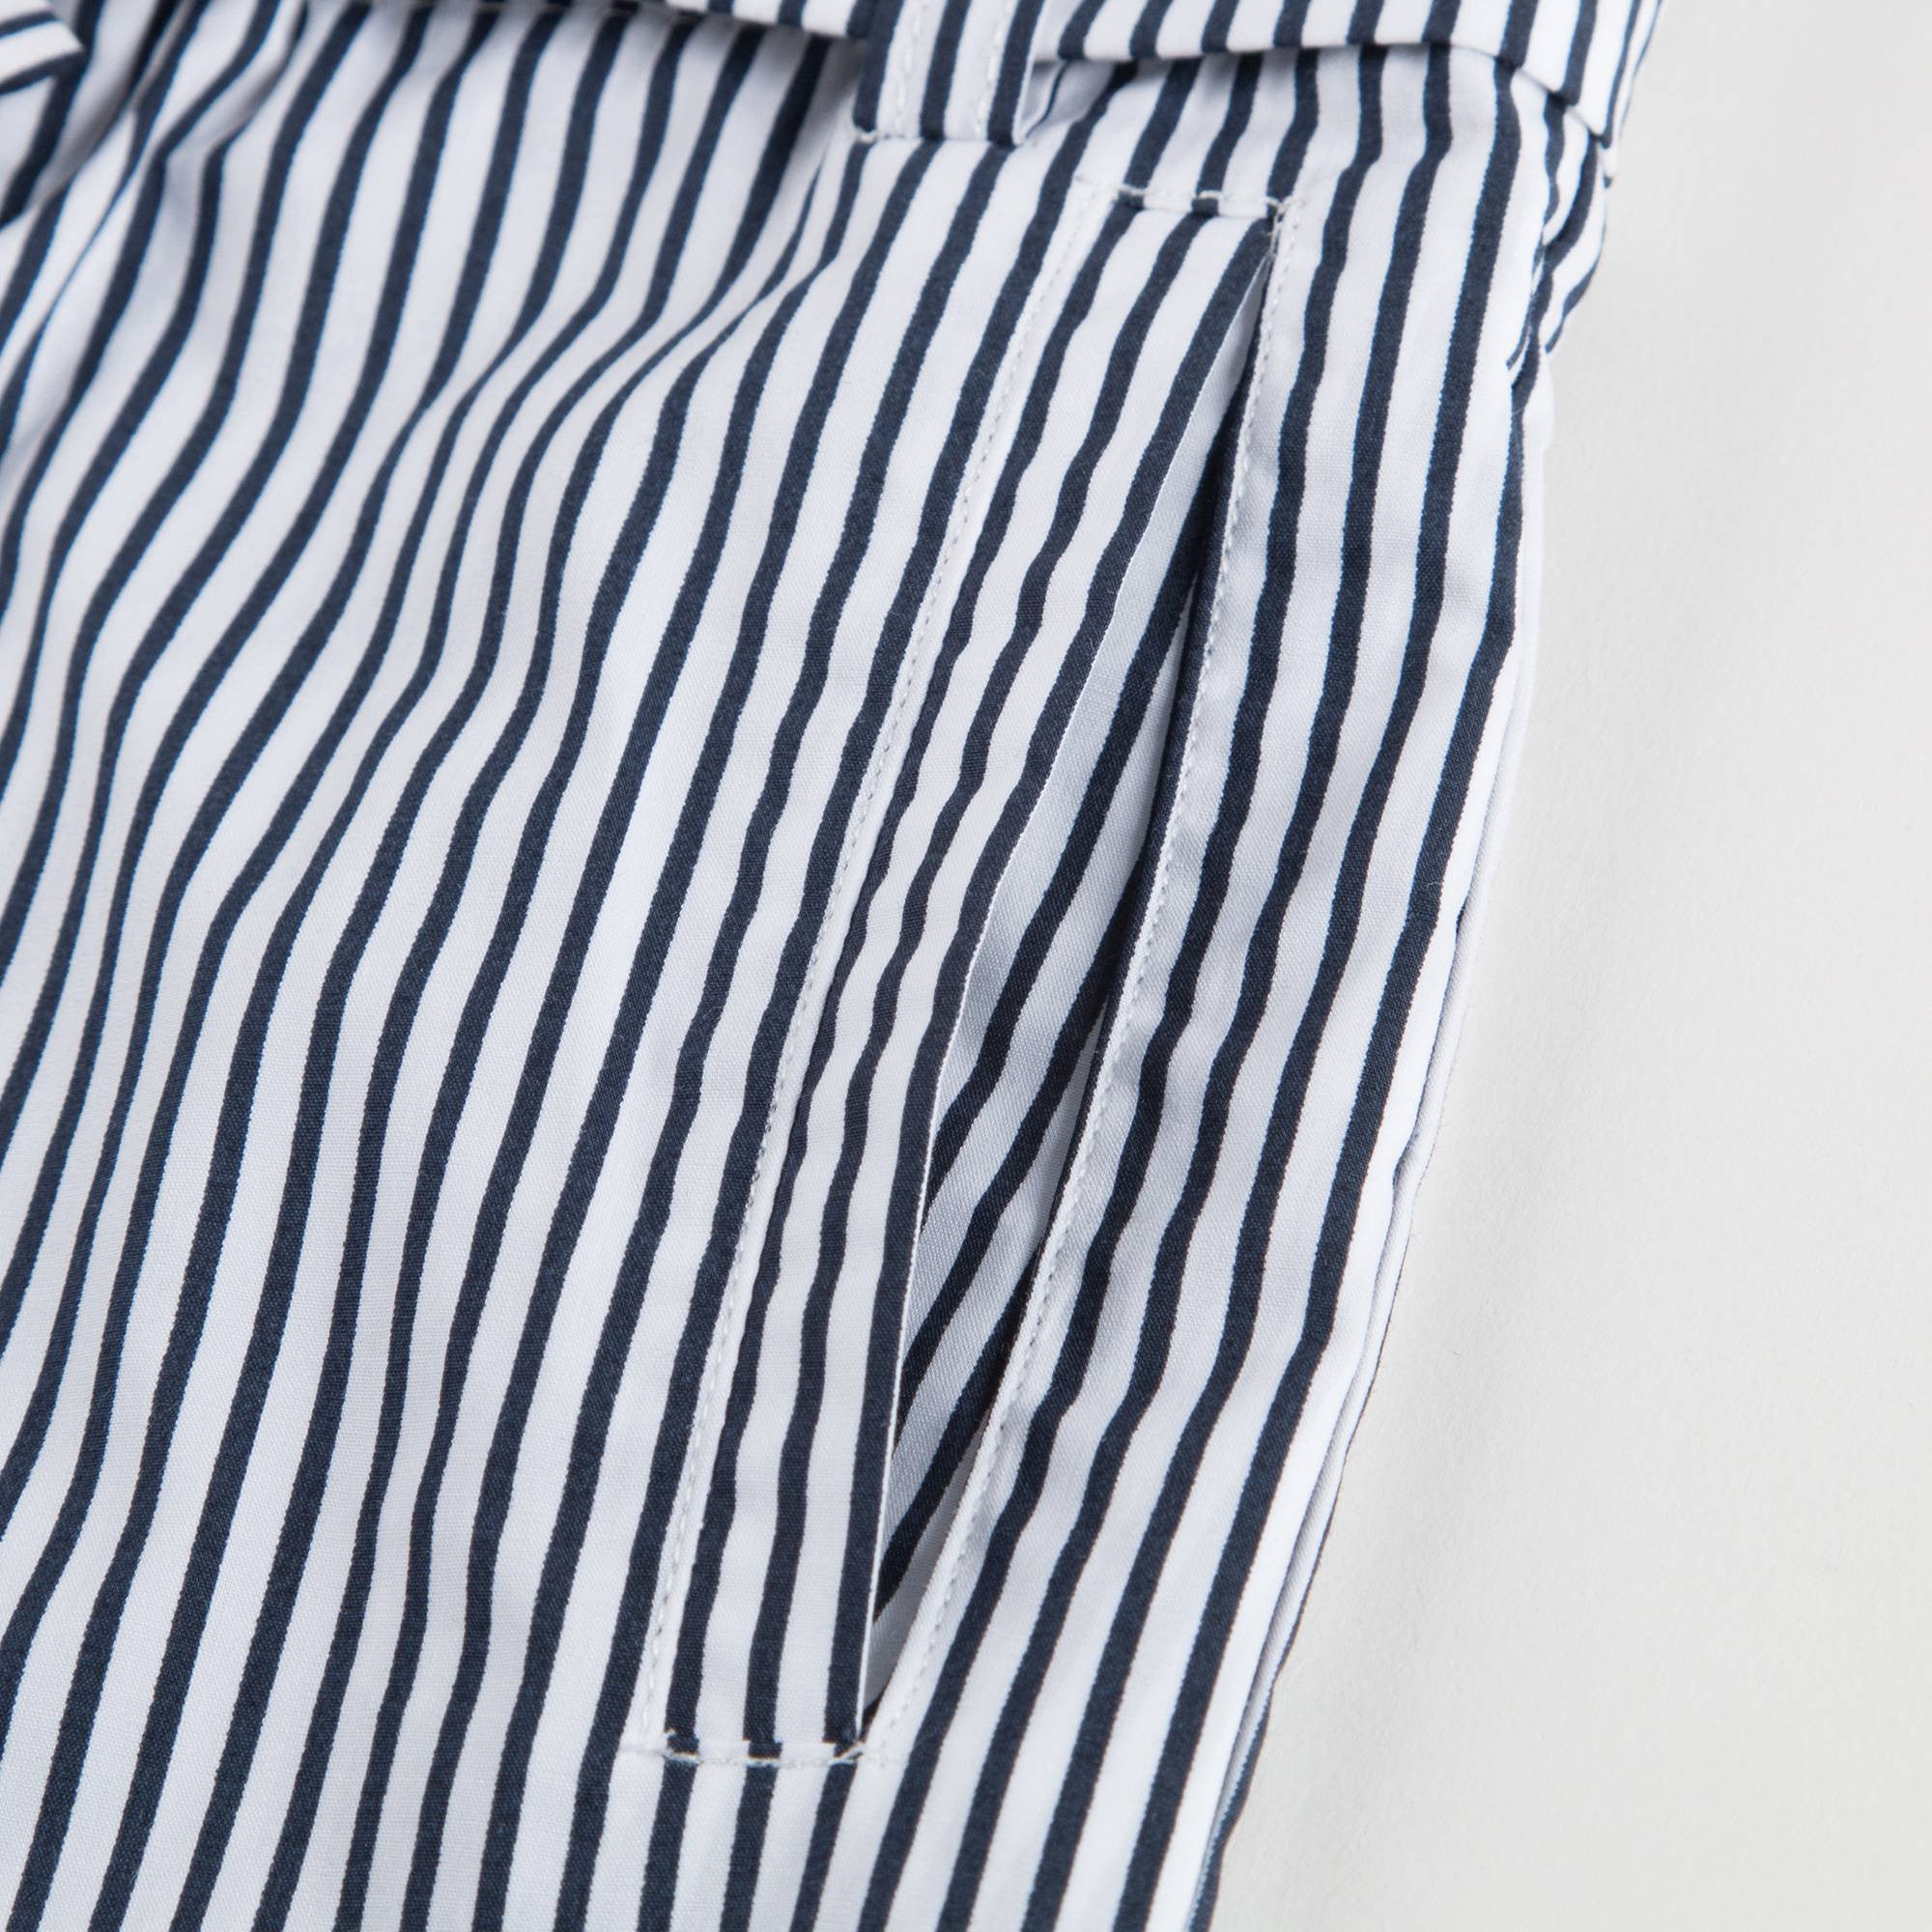 Girls Blue & White Striped Cotton Trousers